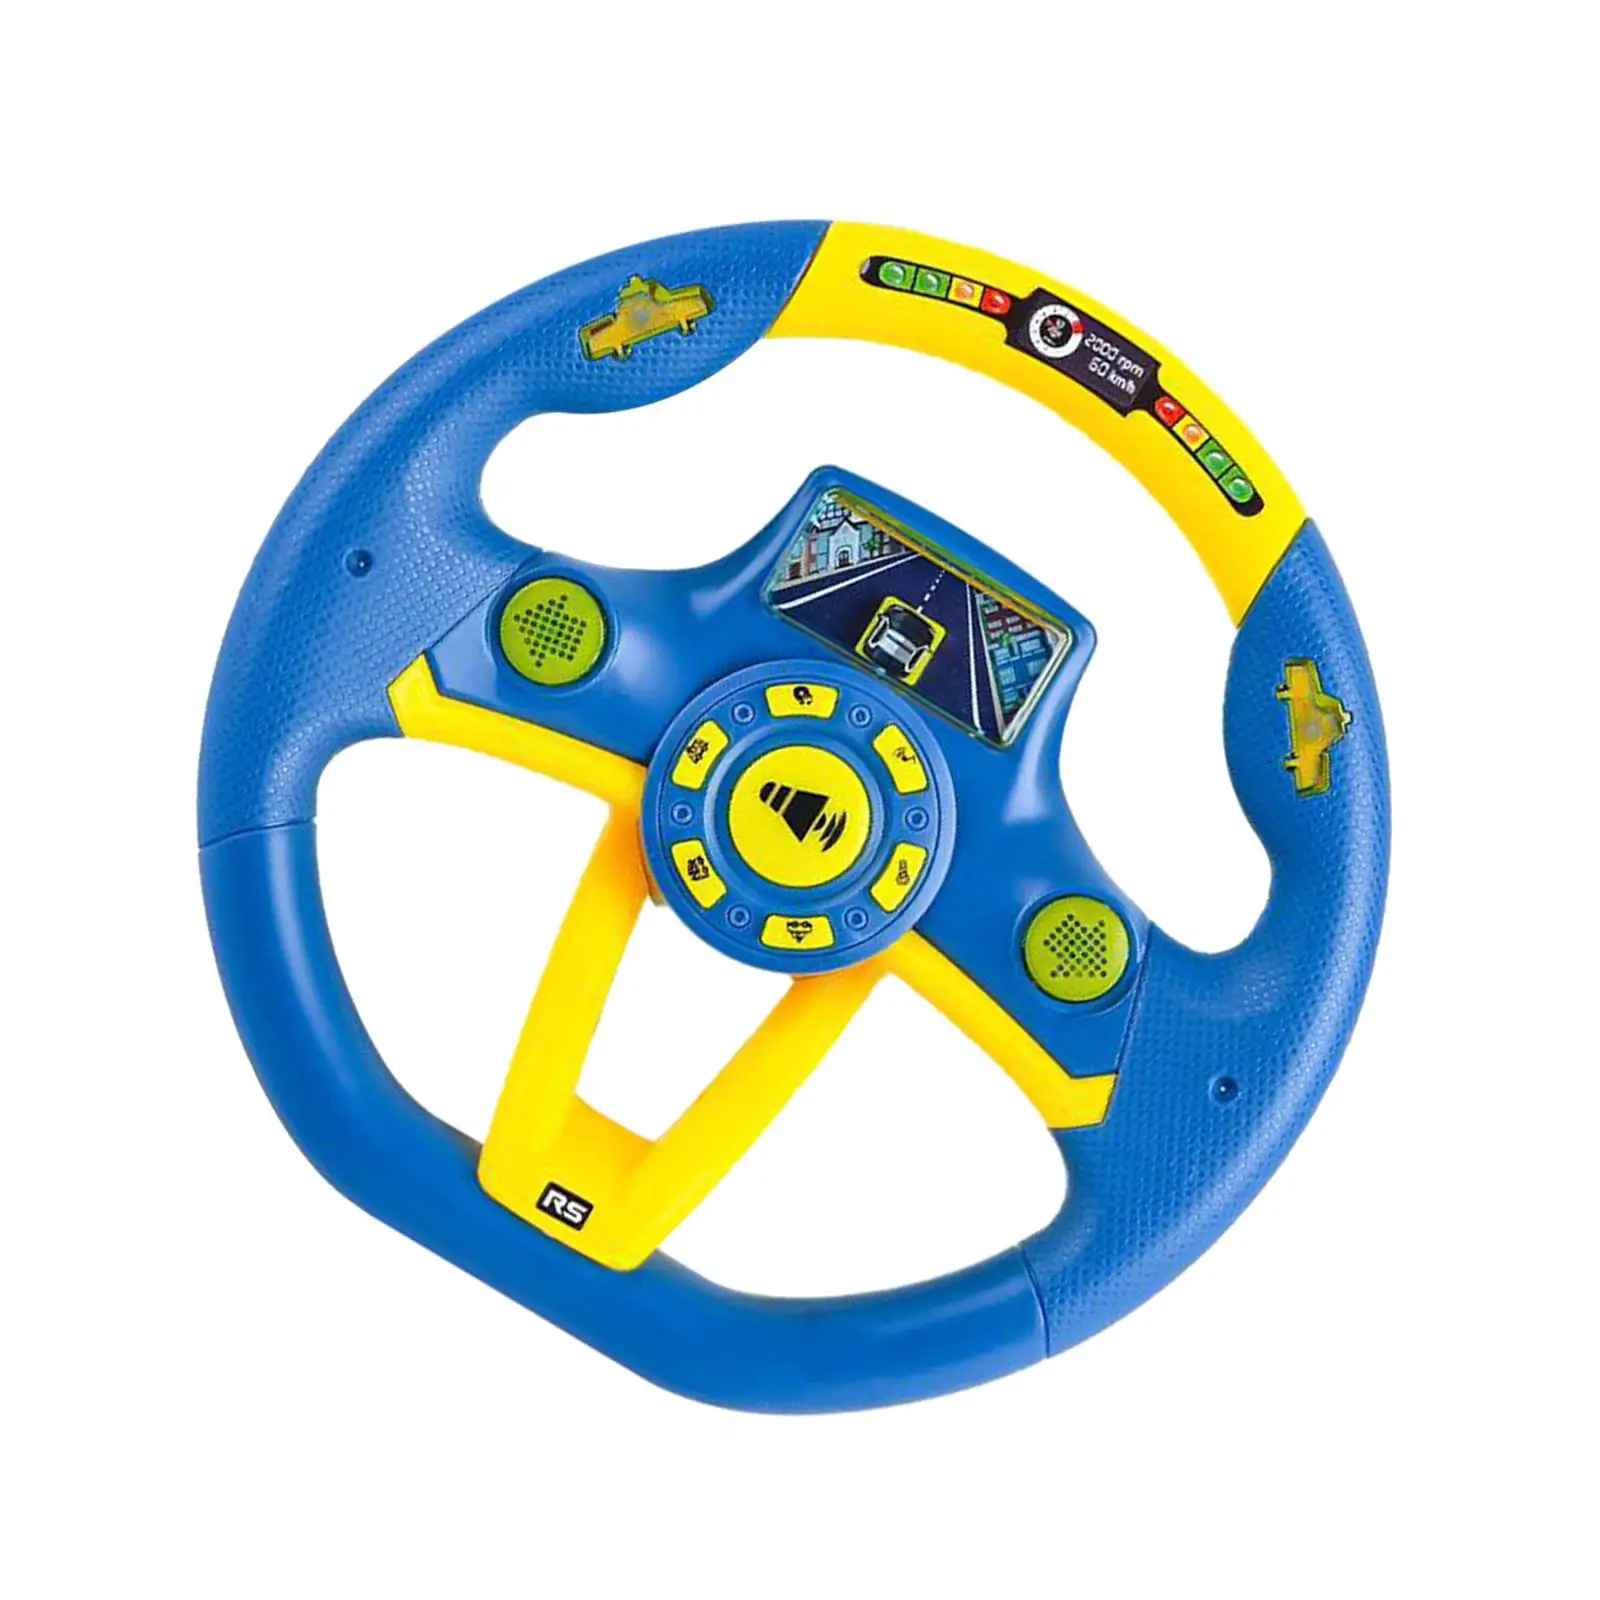 Round Steering Wheel Toy with Lights Kids Electric Wheel Toy for Playground Climbing Frame Amusement Park Treehouse Gifts